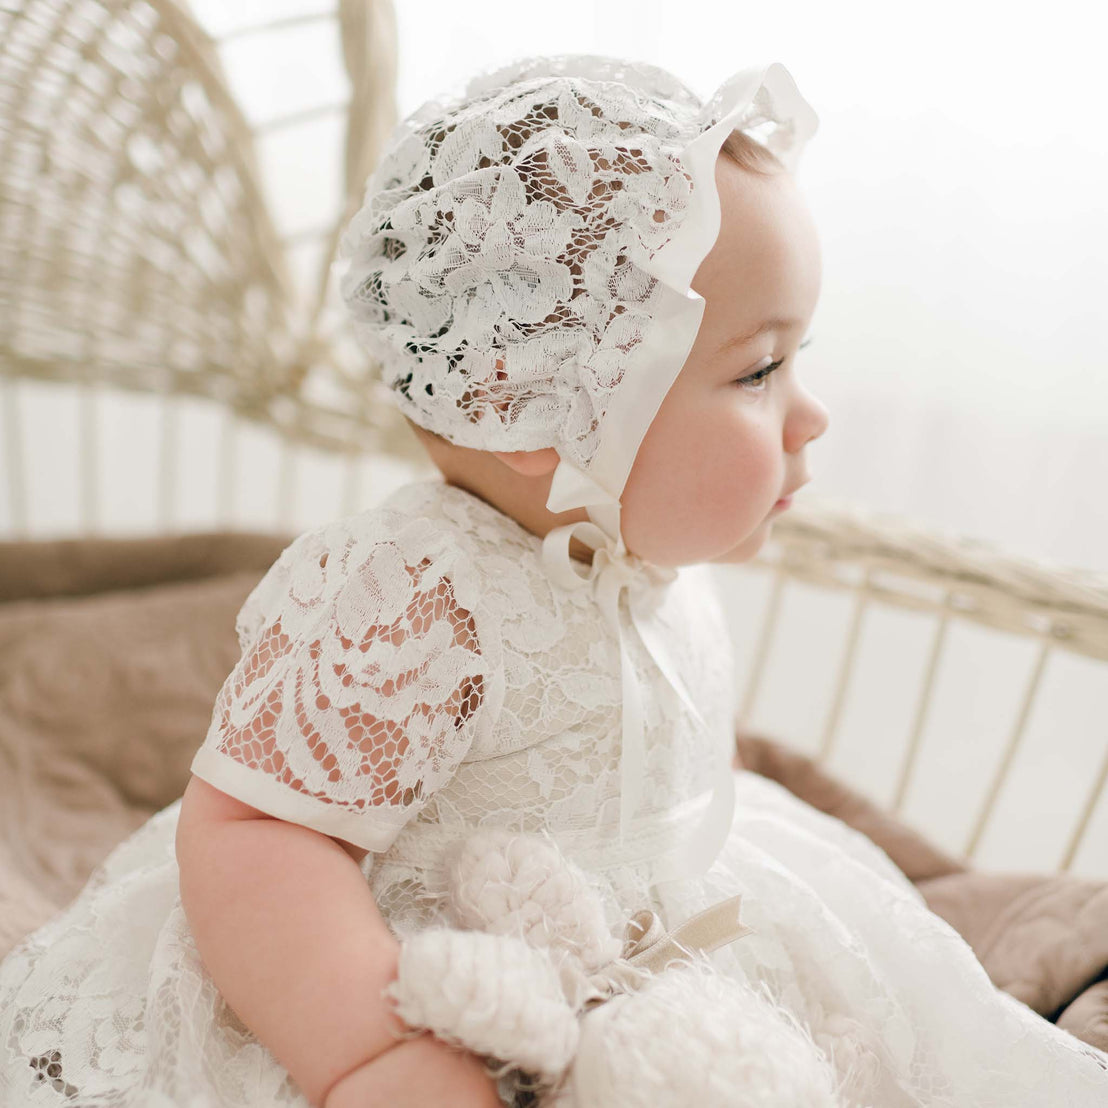 A baby wearing the Rose Lace Bonnet and matching Rose Christening Gown sits in a wicker basket, gazing to the side with a reflective expression. The setting conveys a soft, serene mood.